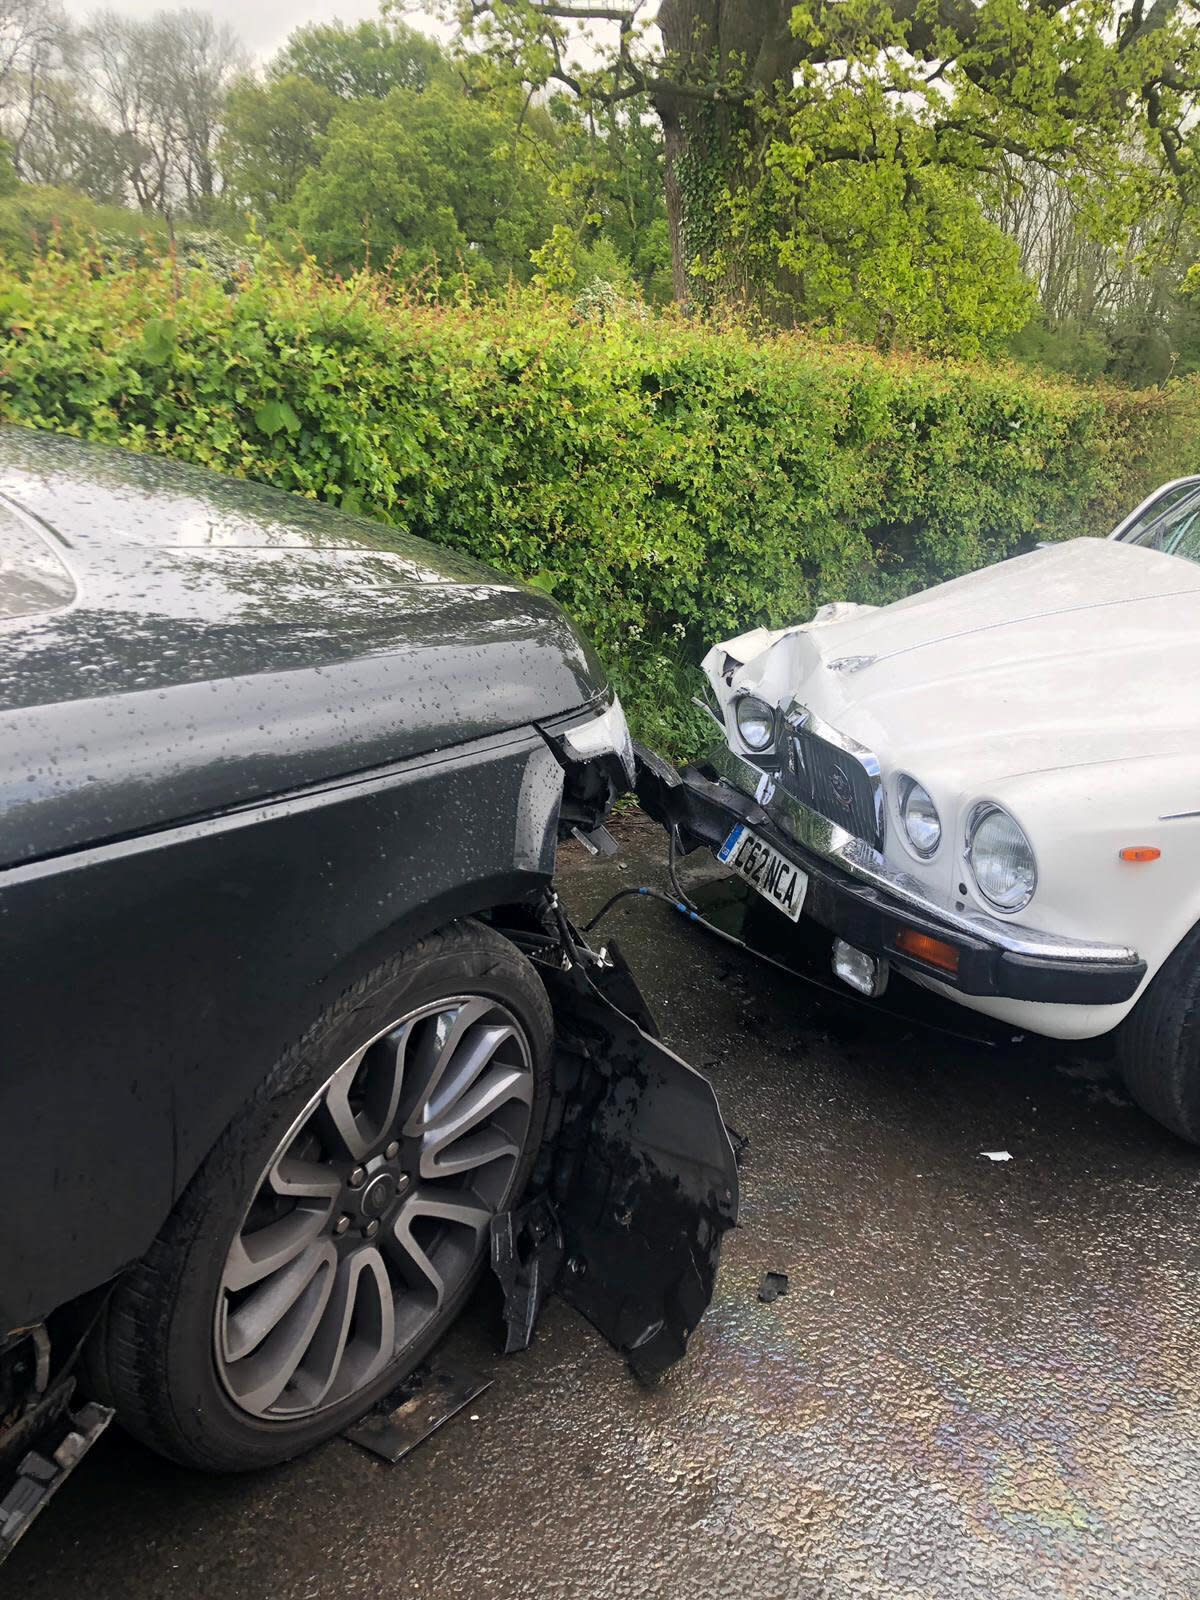 **PICTURE RELEASED FOR SUNDAY PRINT MEDIA - ONLINE EMBARGO UNTIL 6.00AM / SUNDAY 12 MAY, 2019**    Collect photo of the damage caused to Patrick Tranter's Jaguar when it was in a collision with Nigel Farage's Range Rover. See SWNS story SWSYfarage. Former UKIP leader Nigel Farage has been banned from his local pub after he allegedly made a swift exit when he was involved in a head on crash with the landlord. Patrick Tranter, 38, was driving home with his one-year-old son when his Jaguar was hit by Farage's Range Rover, he claims. But instead of checking on Patrick and his son, the Eurosceptic MEP is said to have fled the scene. Patrick and his shaken baby son George were taken to hospital in an ambulance, and he claims his car has been written off.  